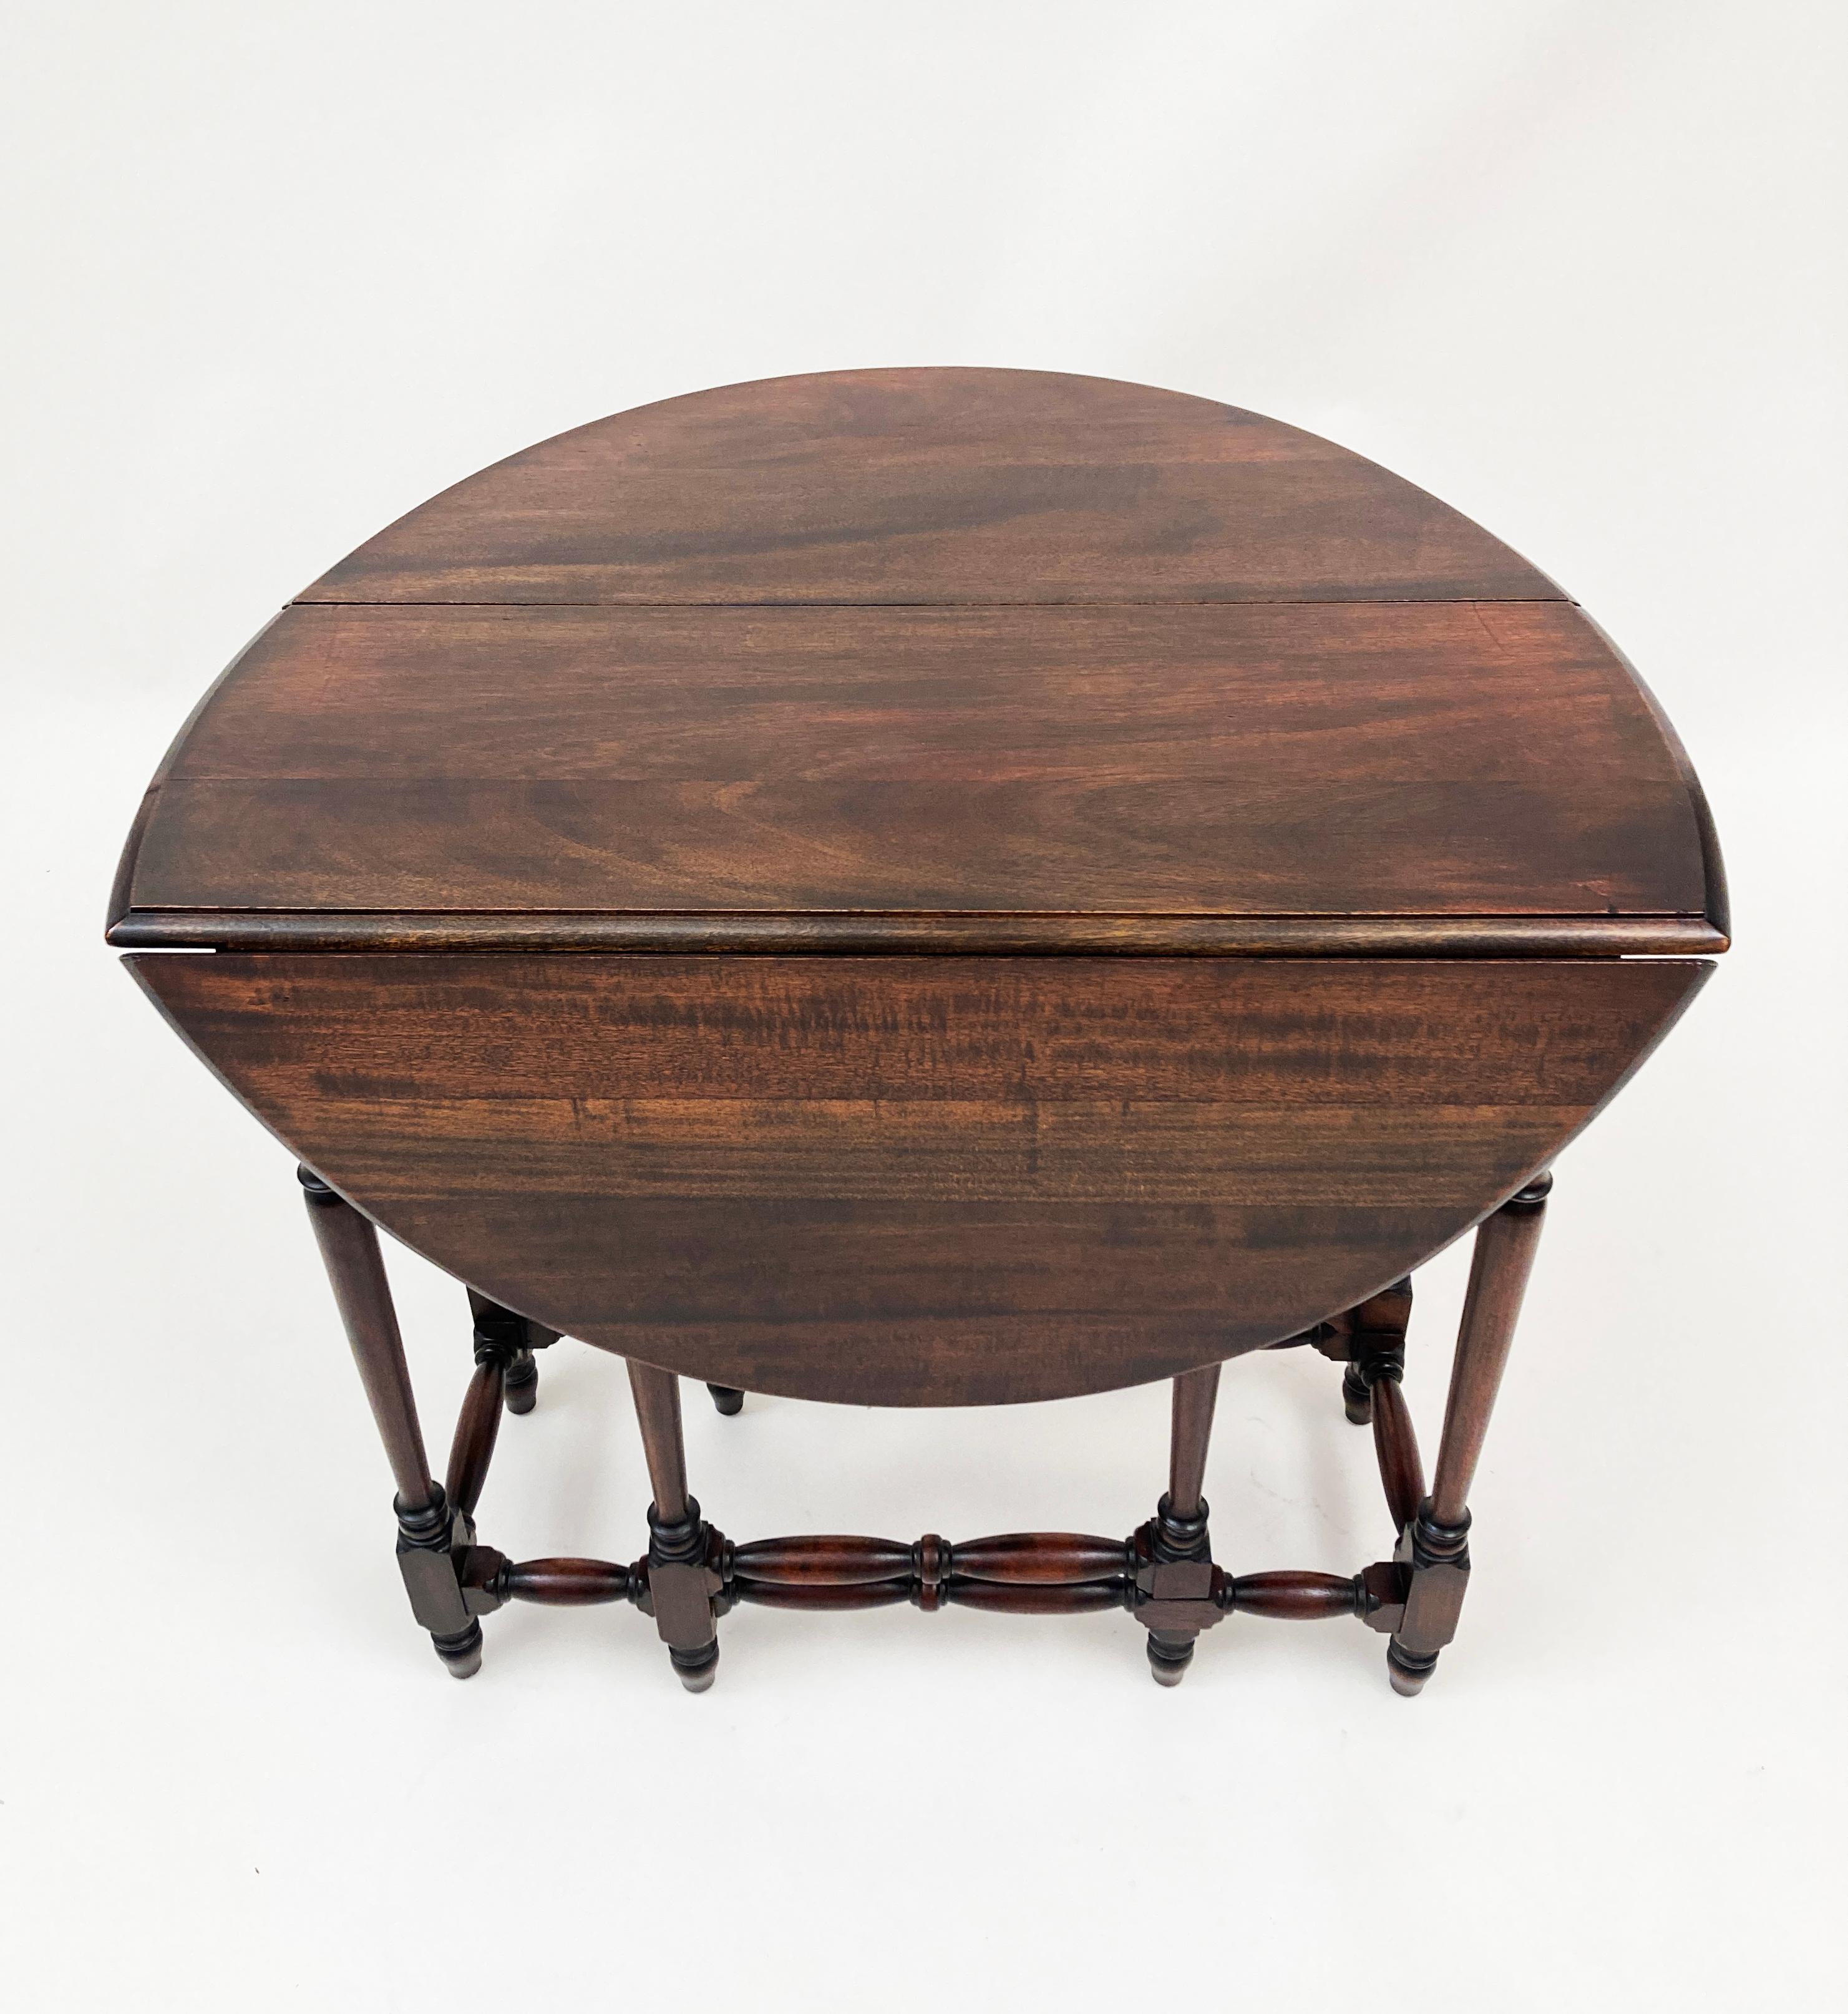 Late 18th Century English William and Mary Drop Leaf Gate-Leg Walnut Table In Good Condition For Sale In Louisville, KY